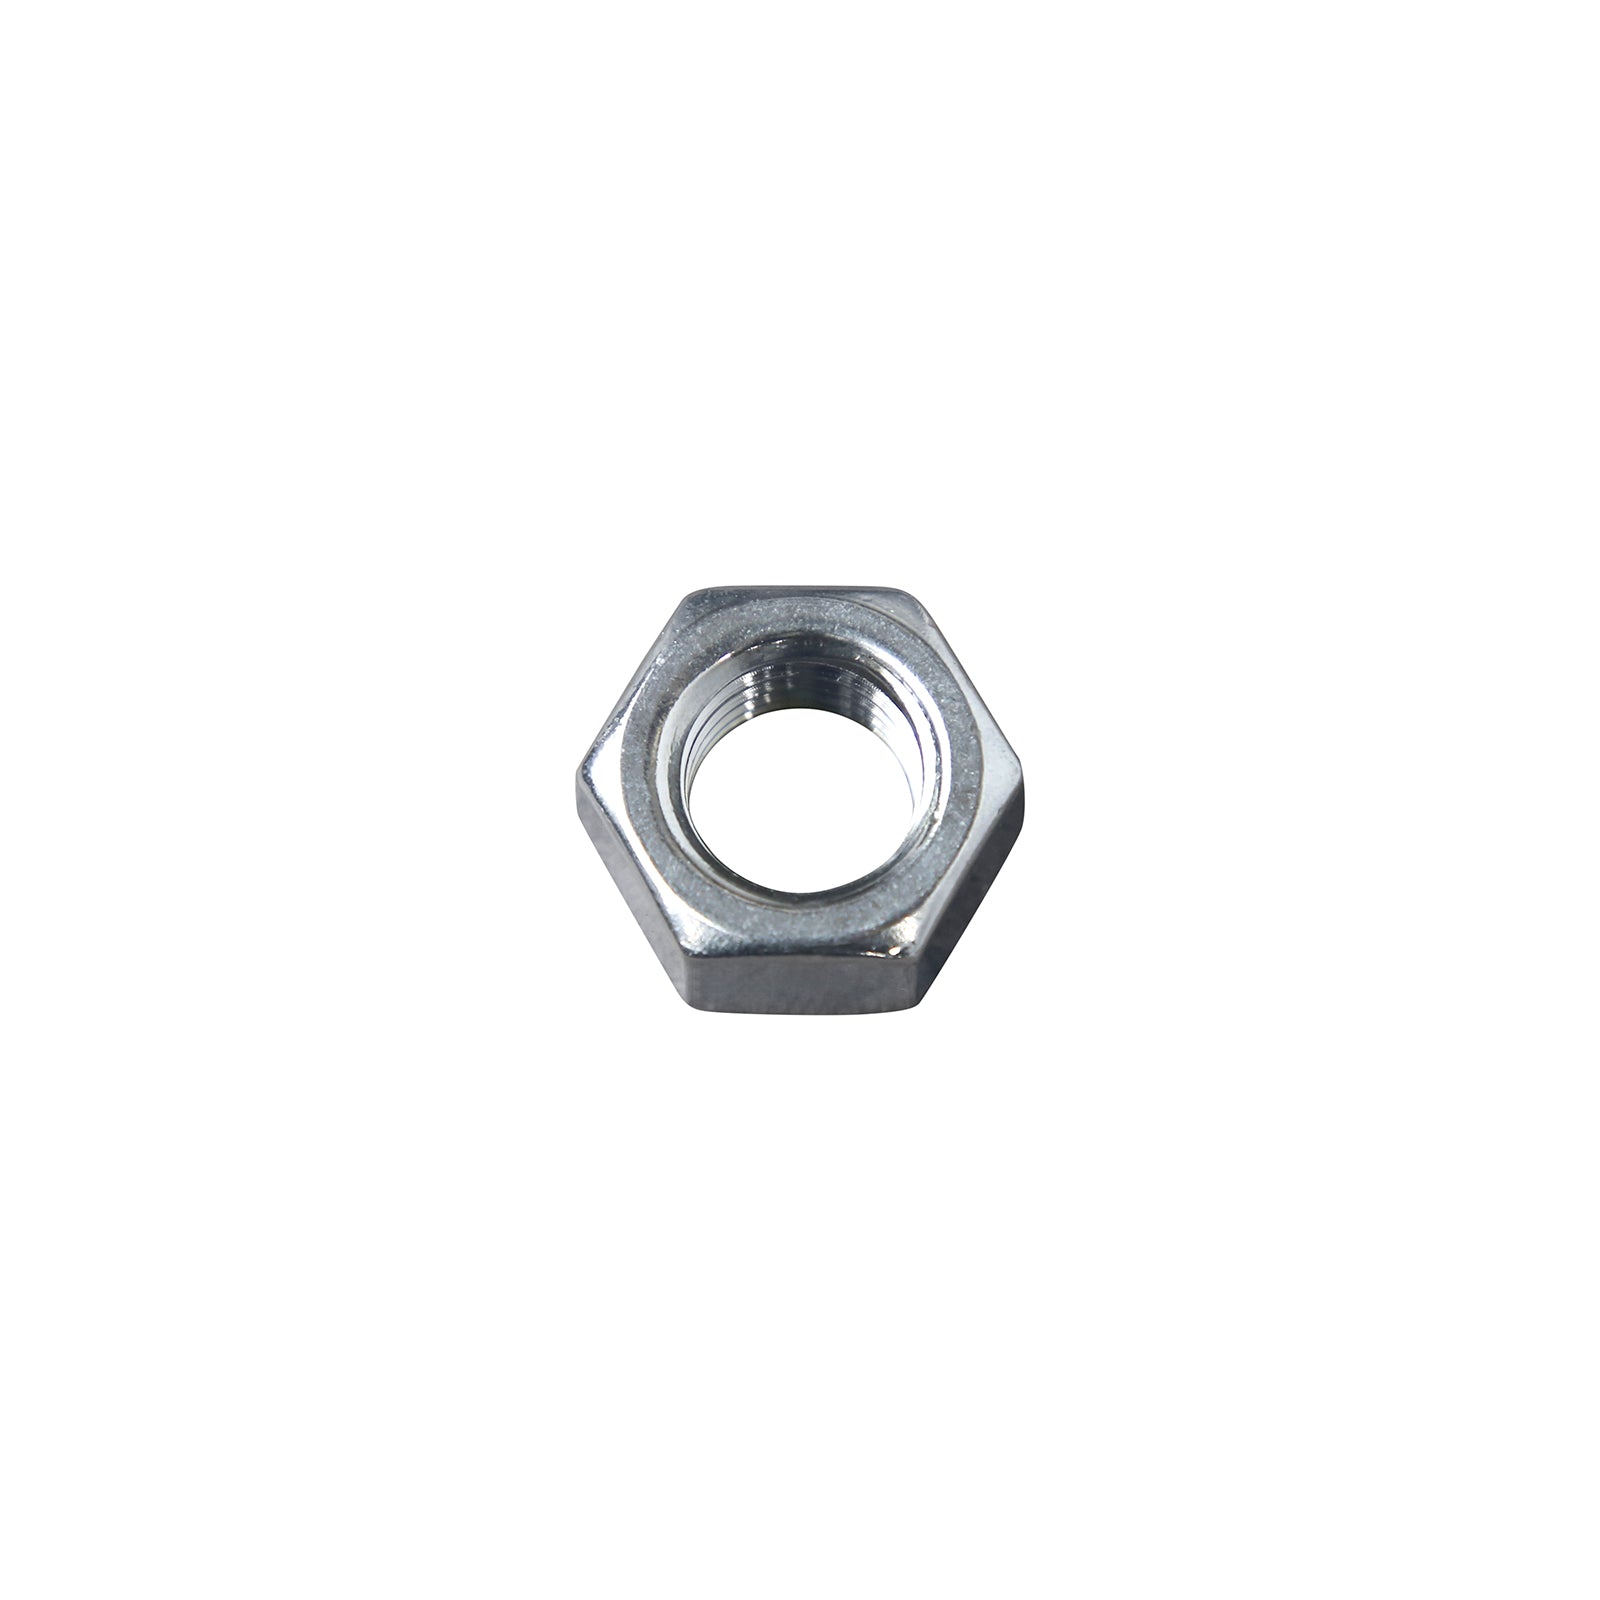 5/8"-11 Conquest Hex Nut - 304 Stainless Steel